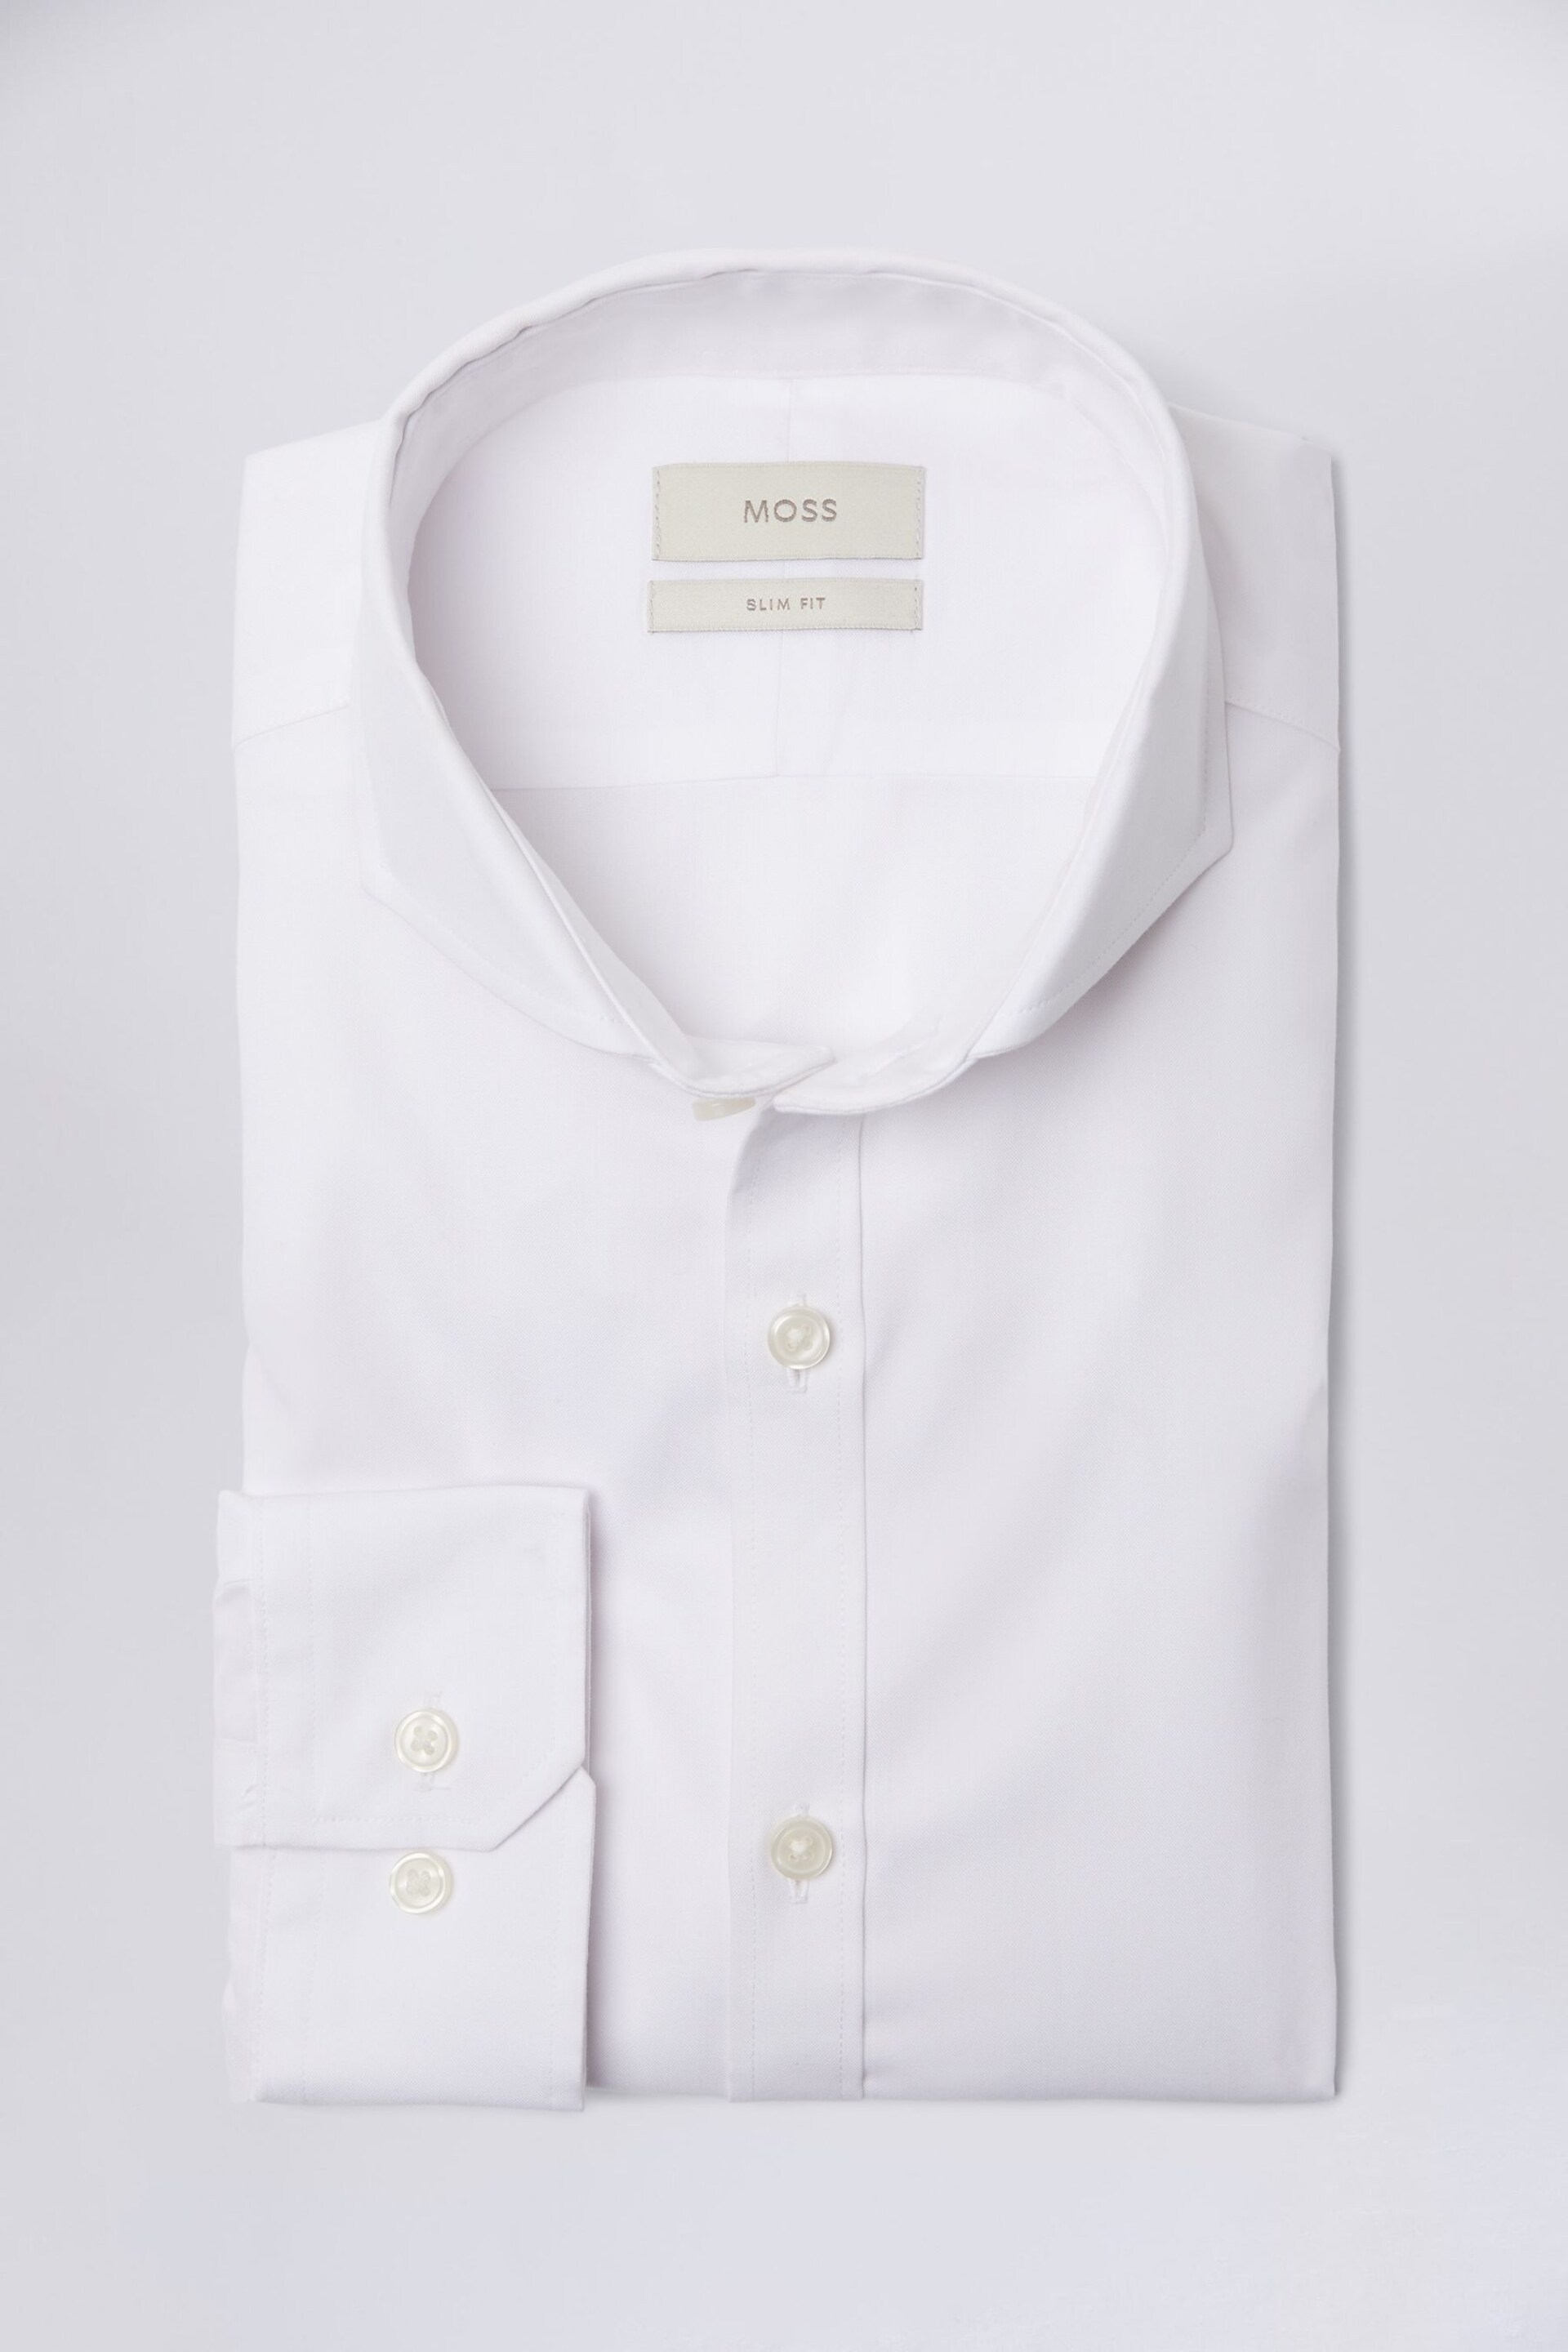 MOSS White Slim Fit Pinpoint Oxford Non Iron Shirt - Image 4 of 4